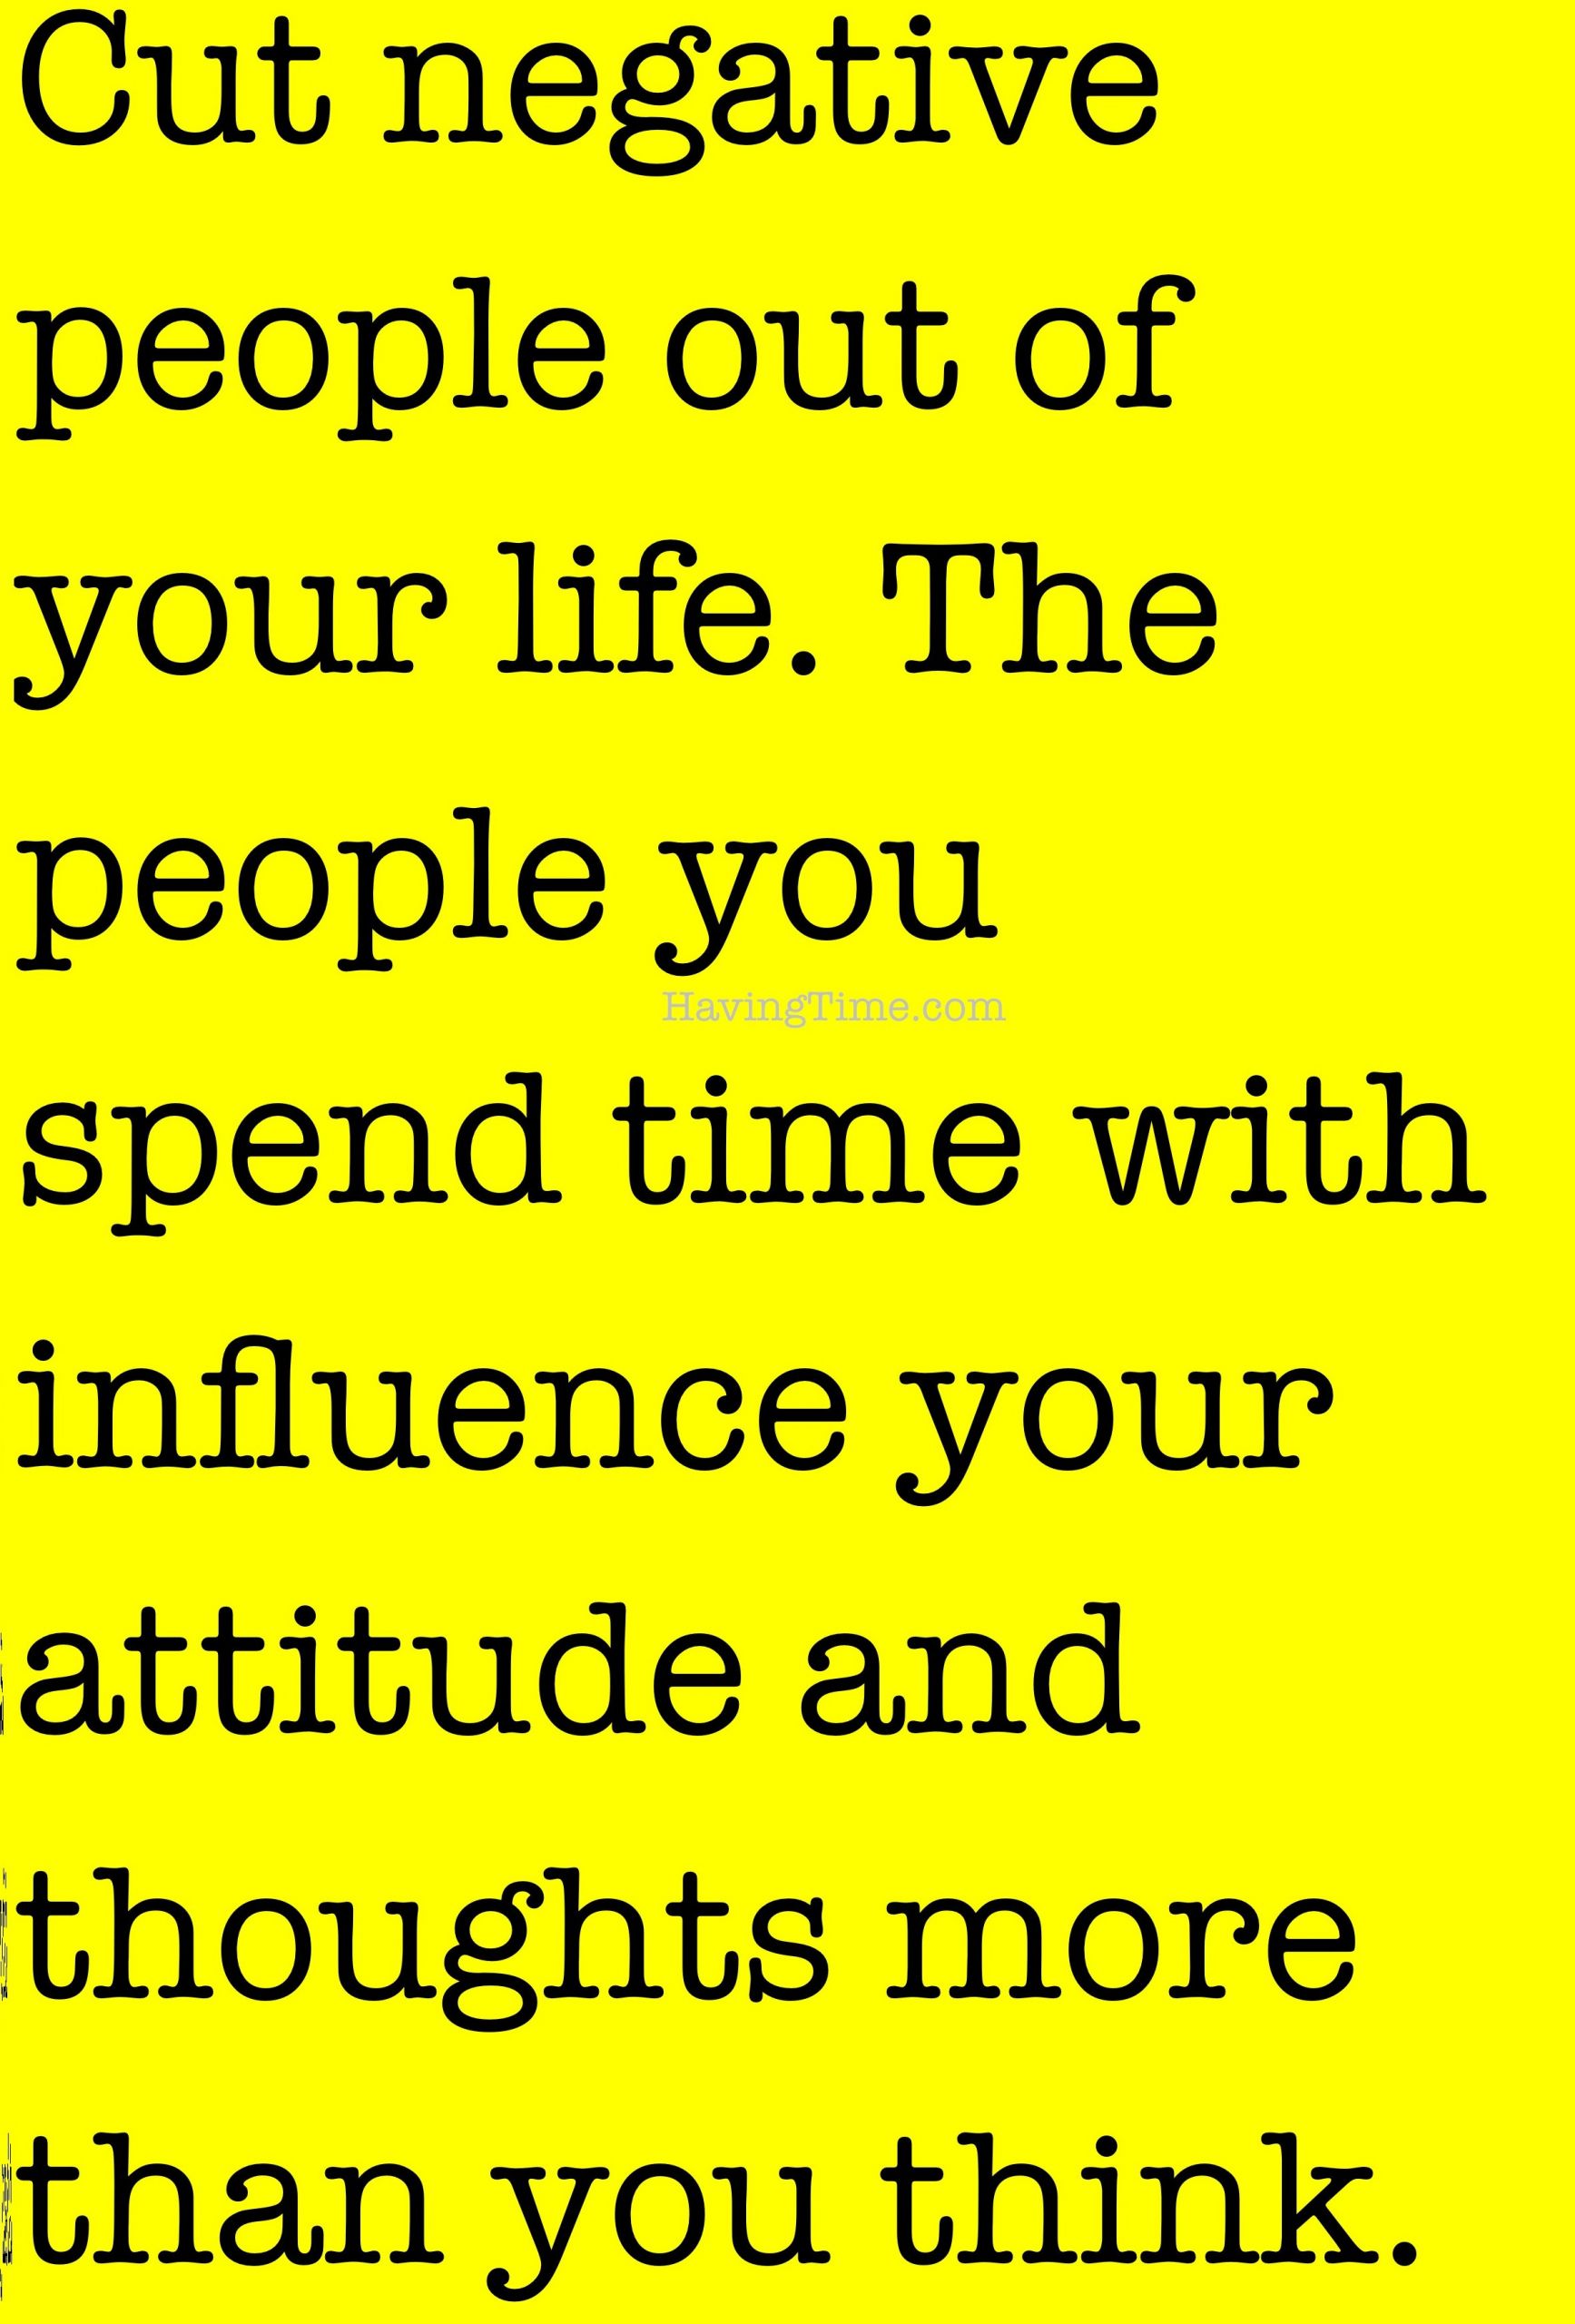 Life Quotes About People
 Low Life People Quotes QuotesGram